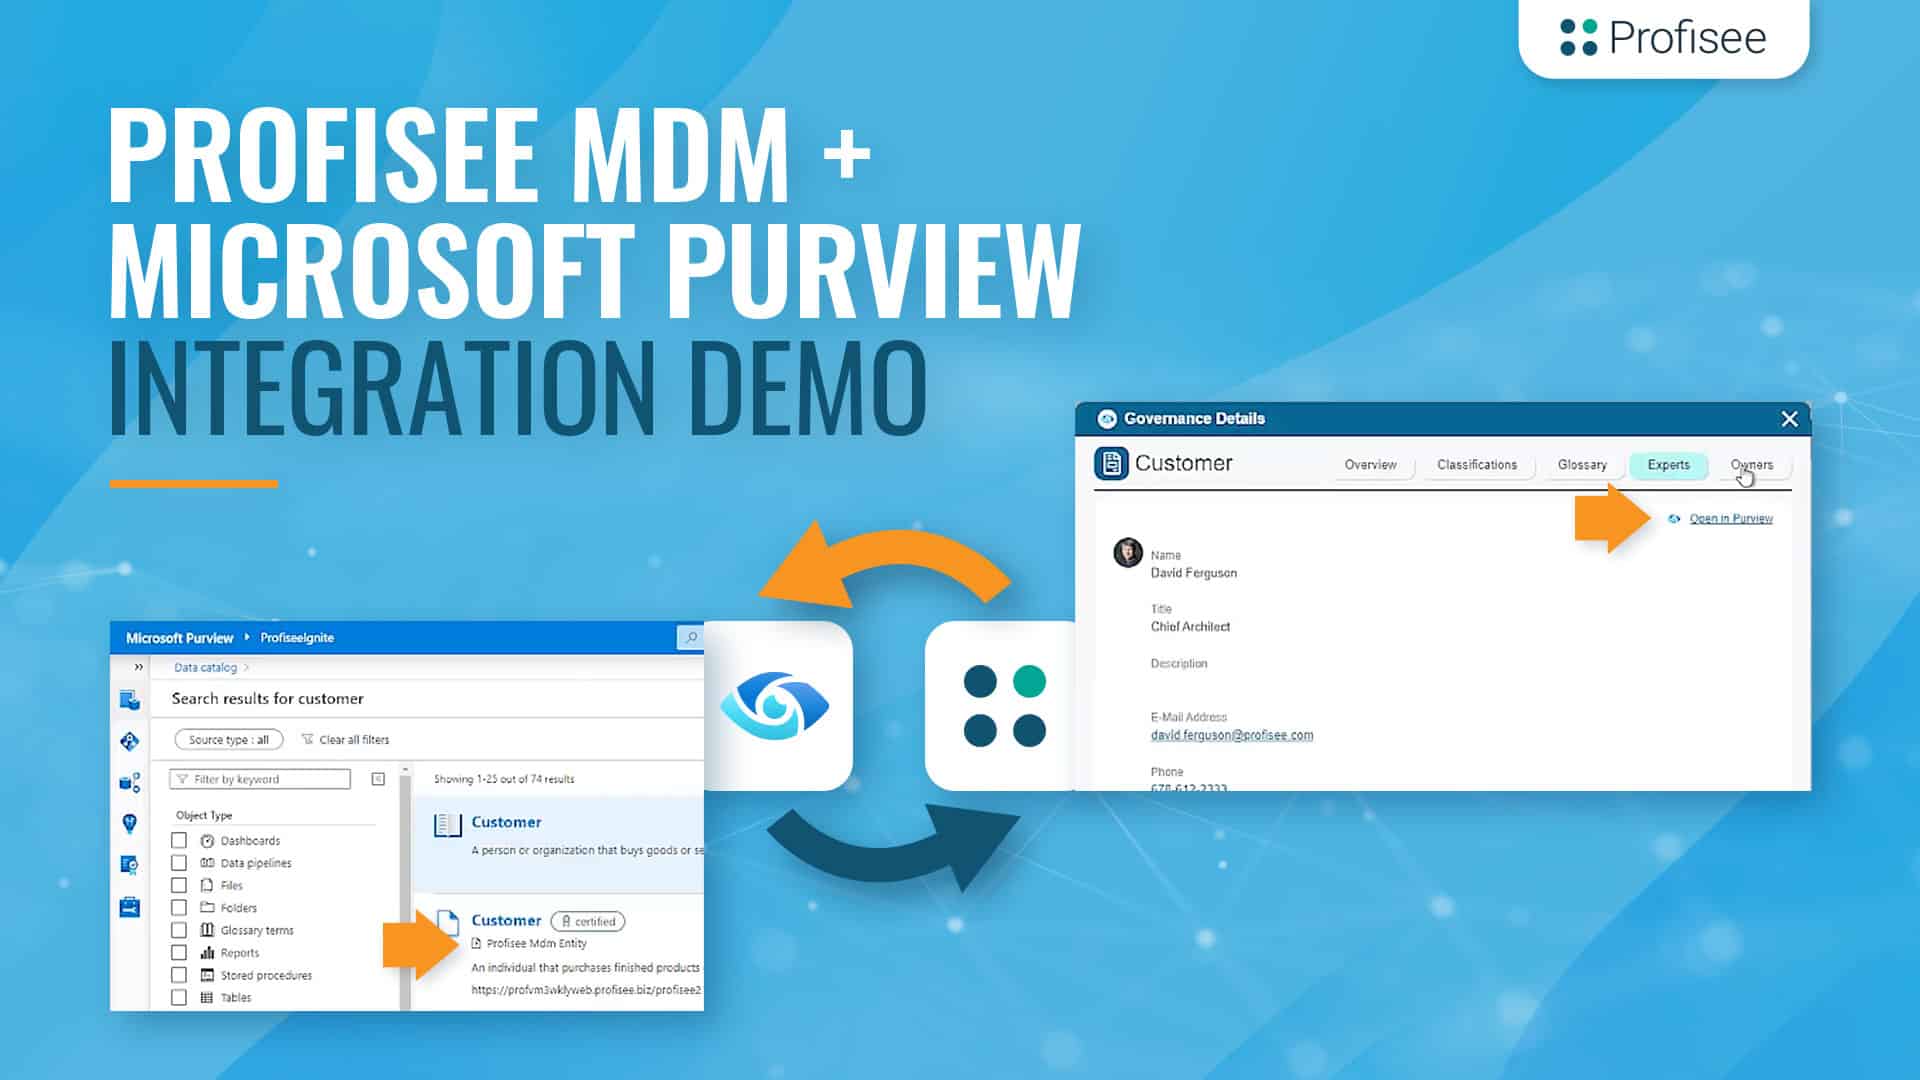 Featured image for "Profisee MDM + Microsoft Purview Integration Demo" resource